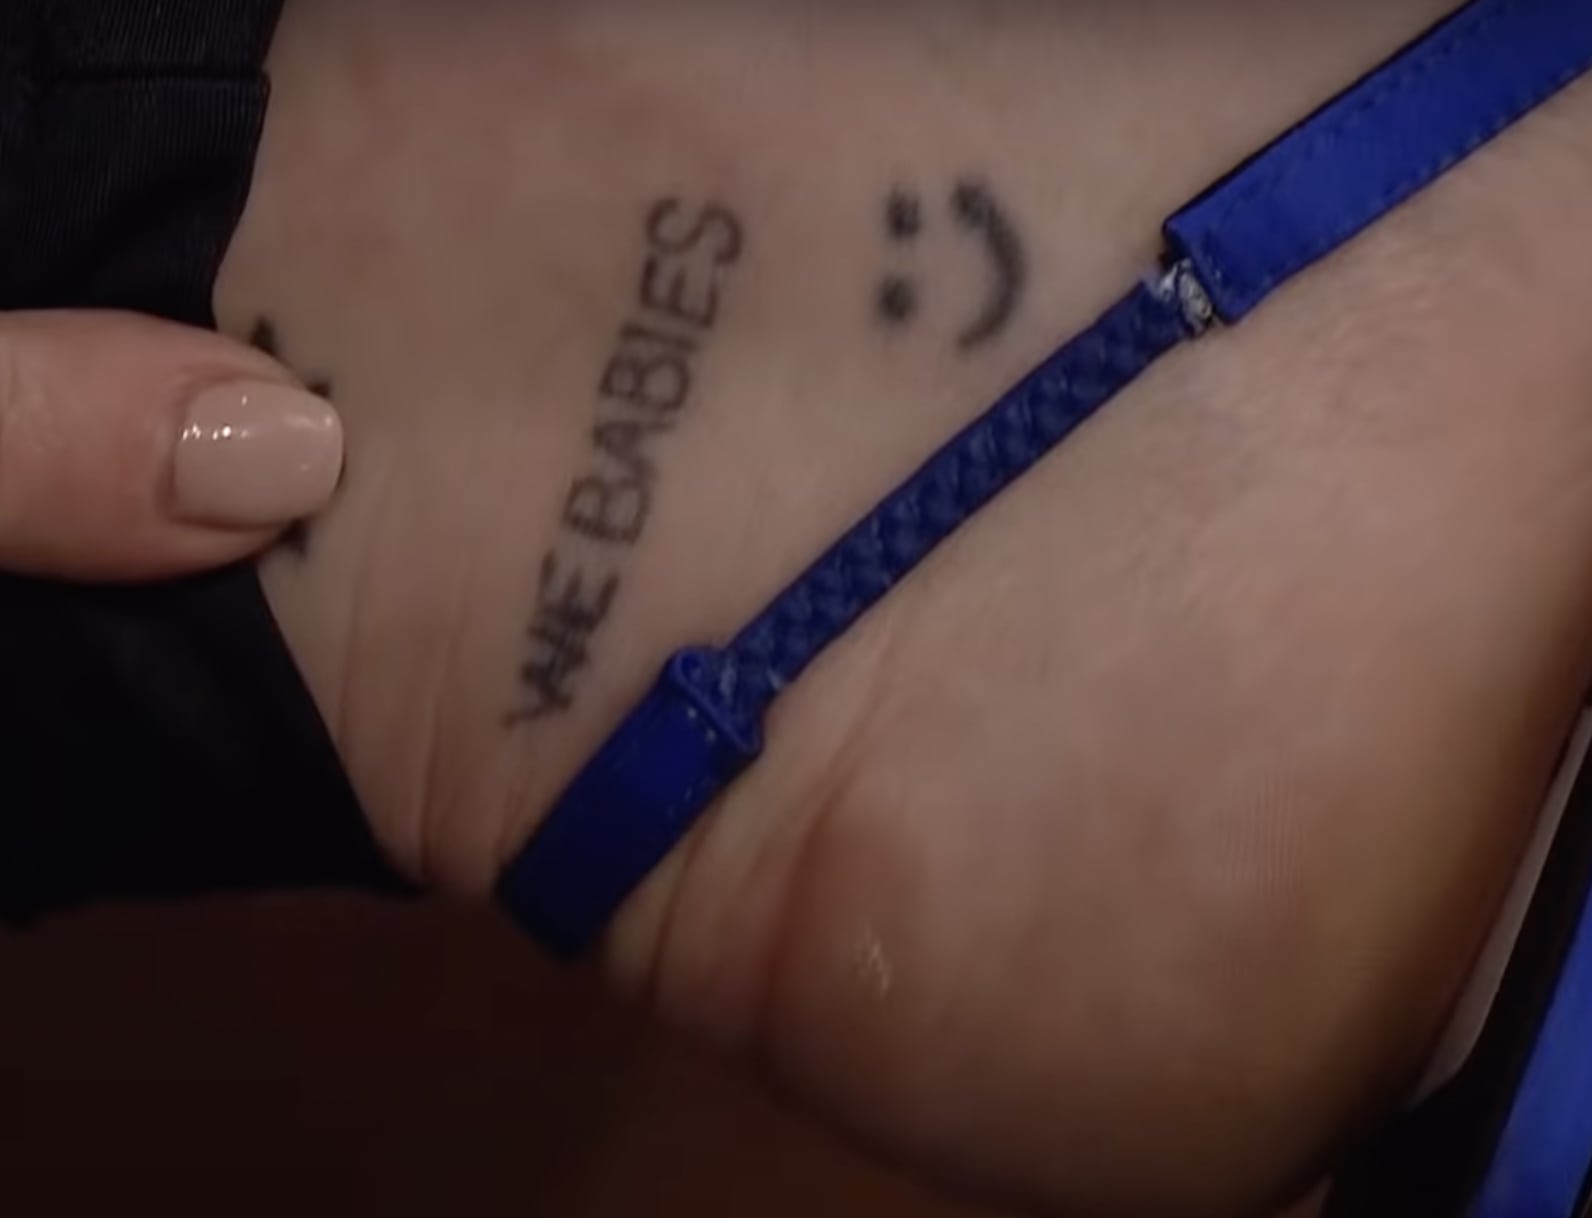 Miley Cyrus shows off her We Babies foot tattoo, which she got with Pete Davidson in 2017